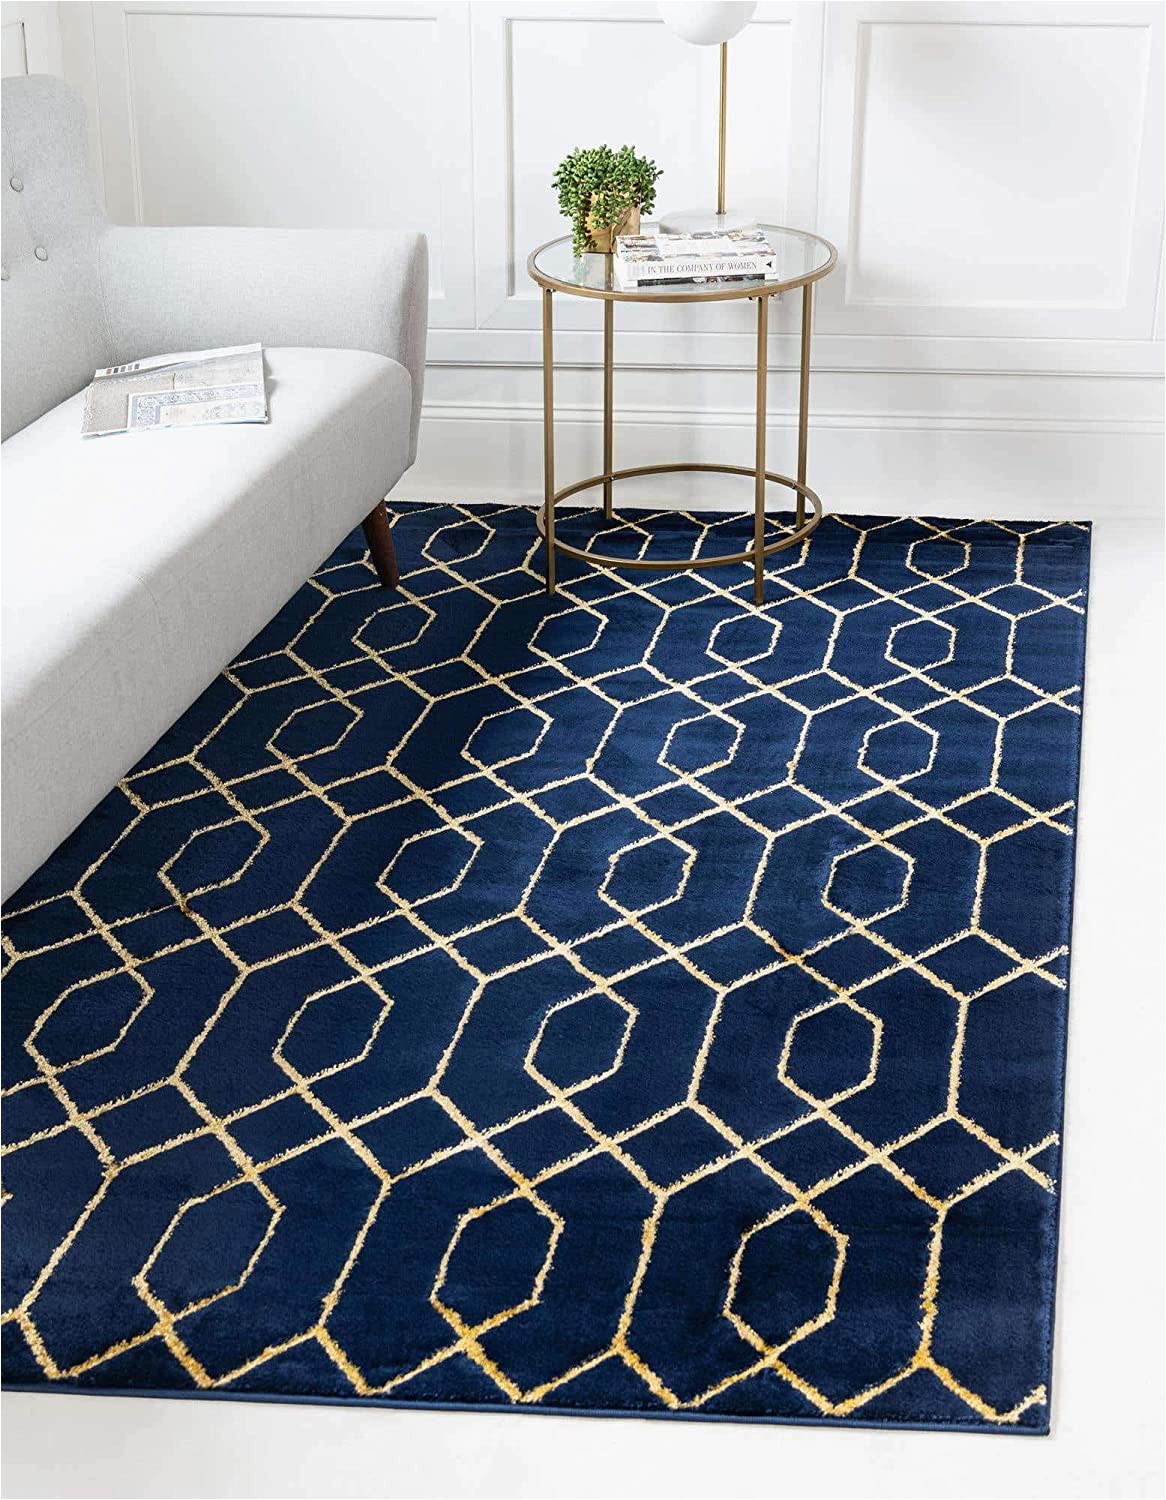 Navy Blue Fur area Rug Unique Loom Marilyn Monroe Glam Collection Textured Geometric Trellis area Rug 9 0 X 12 0 Rectangle Navy Blue Gold